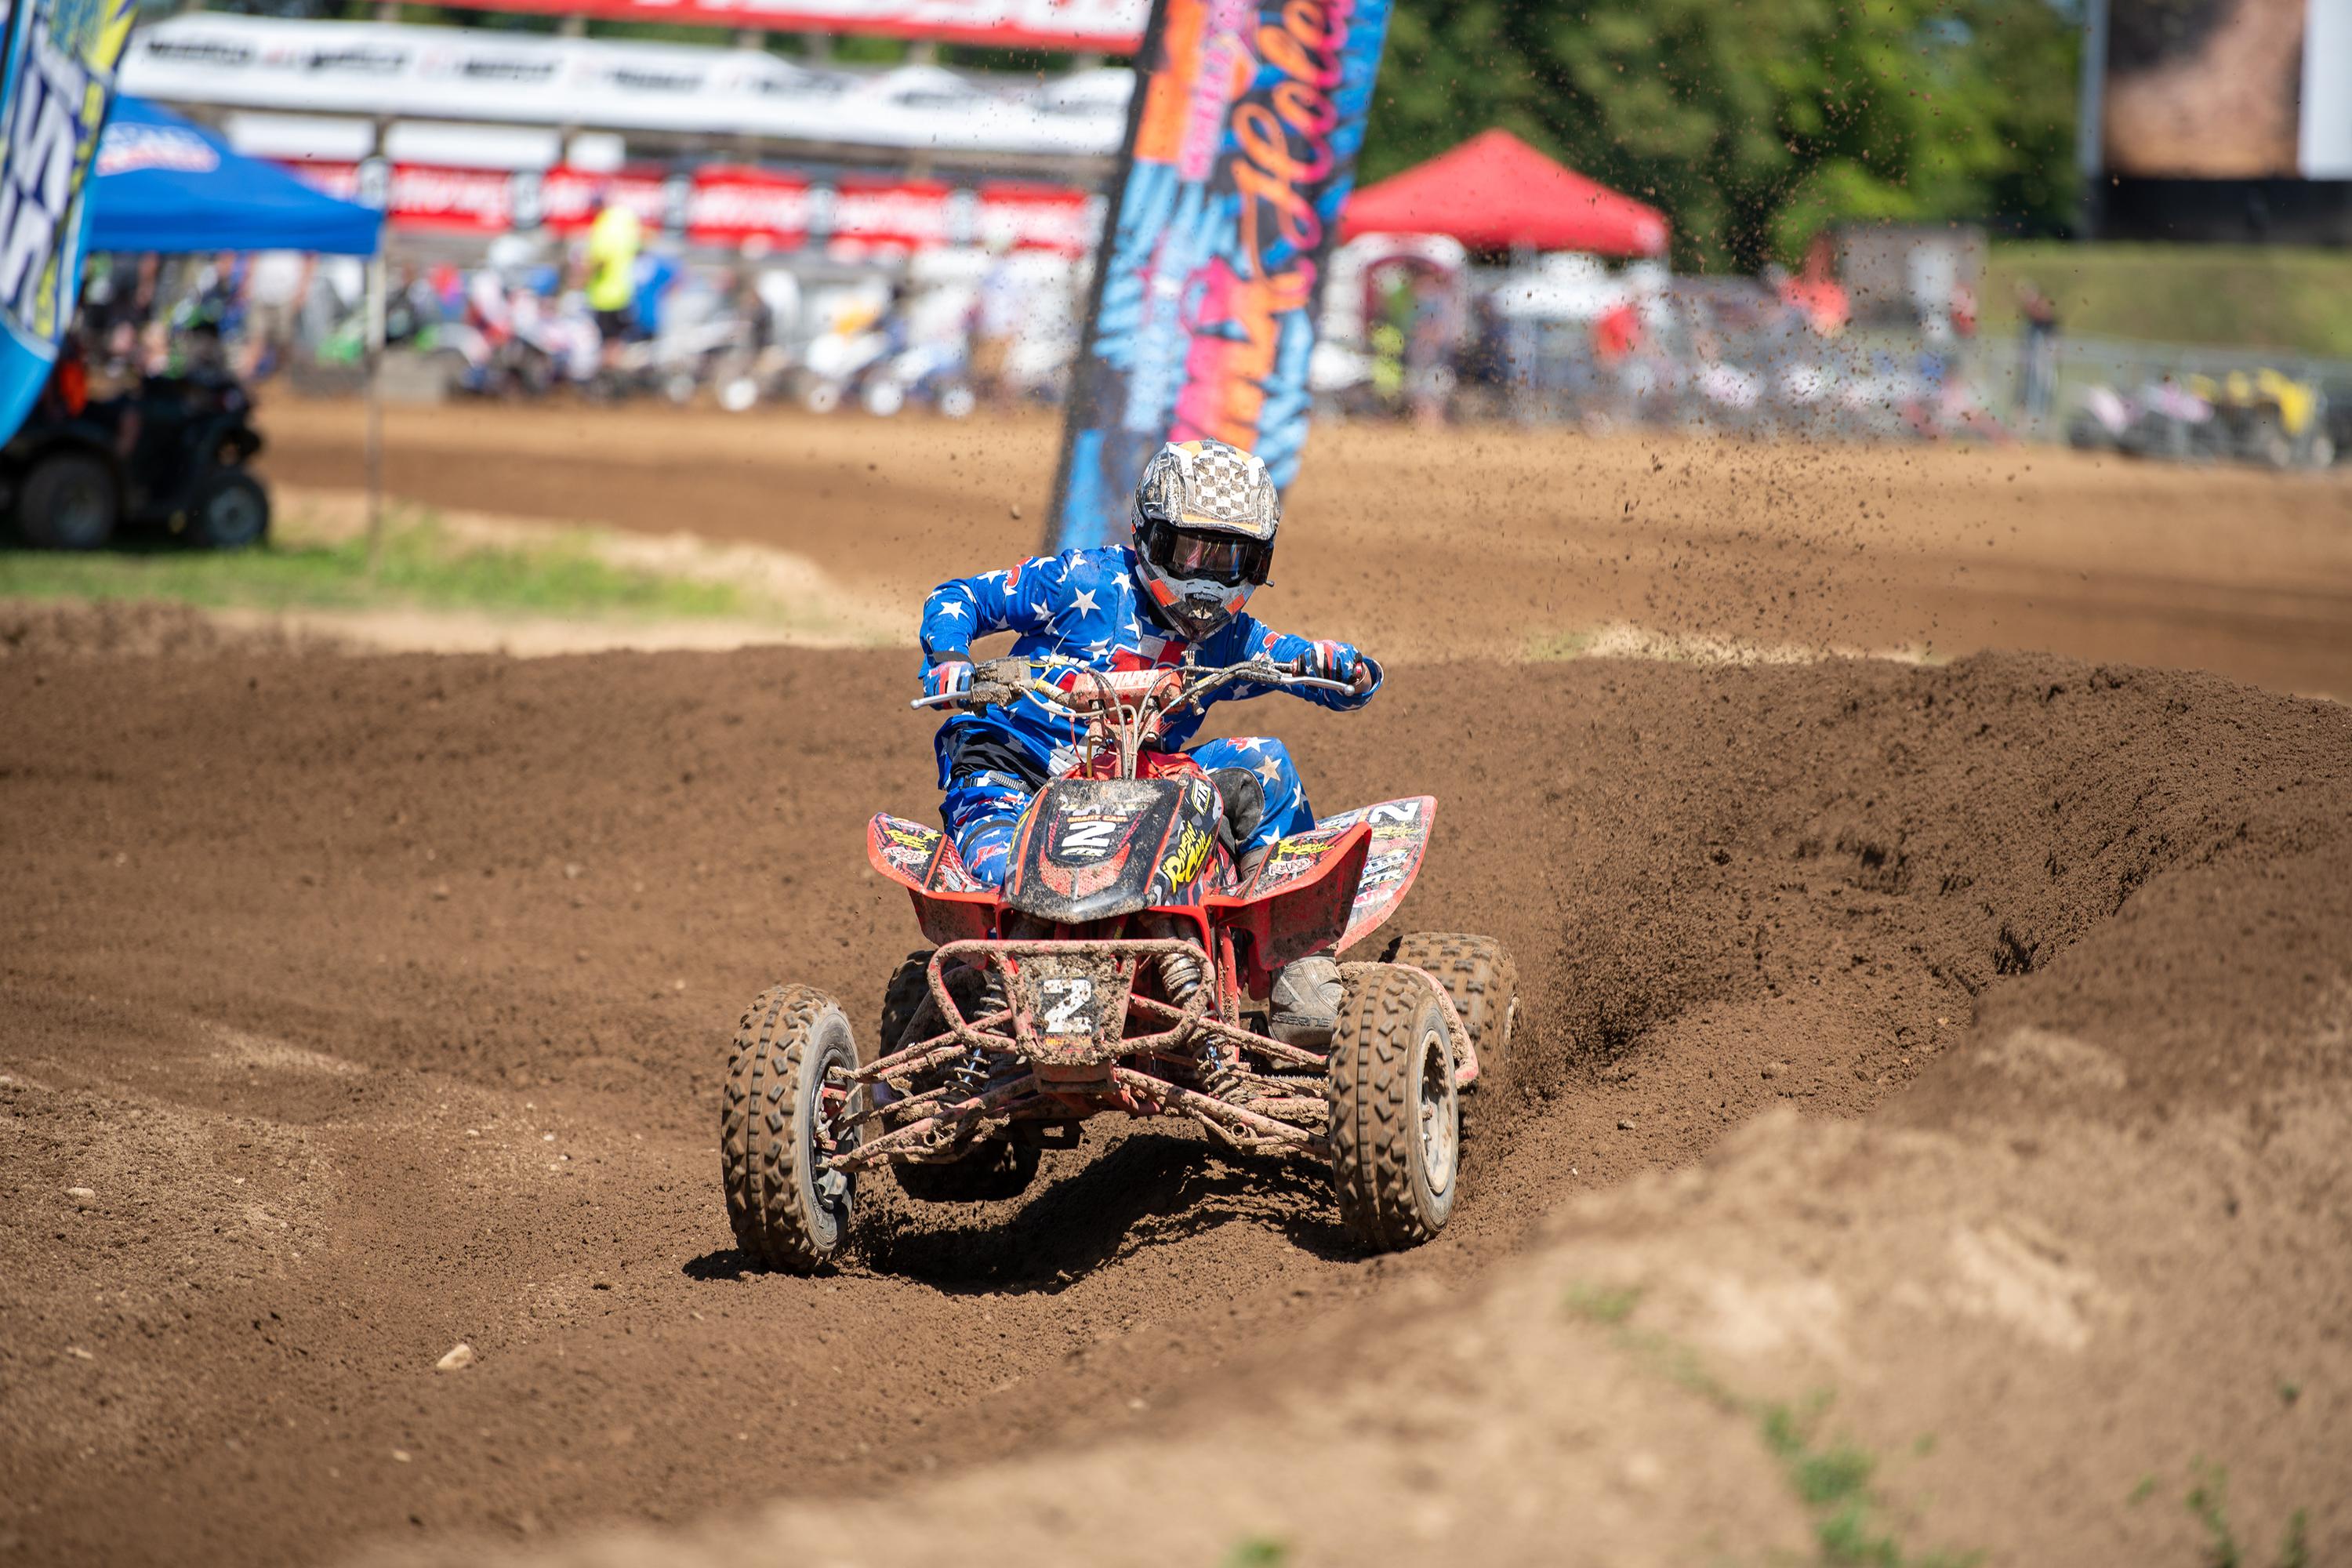 Competition Bulletin 20231 Tentative 2023 ATVMX Supplemental Rules